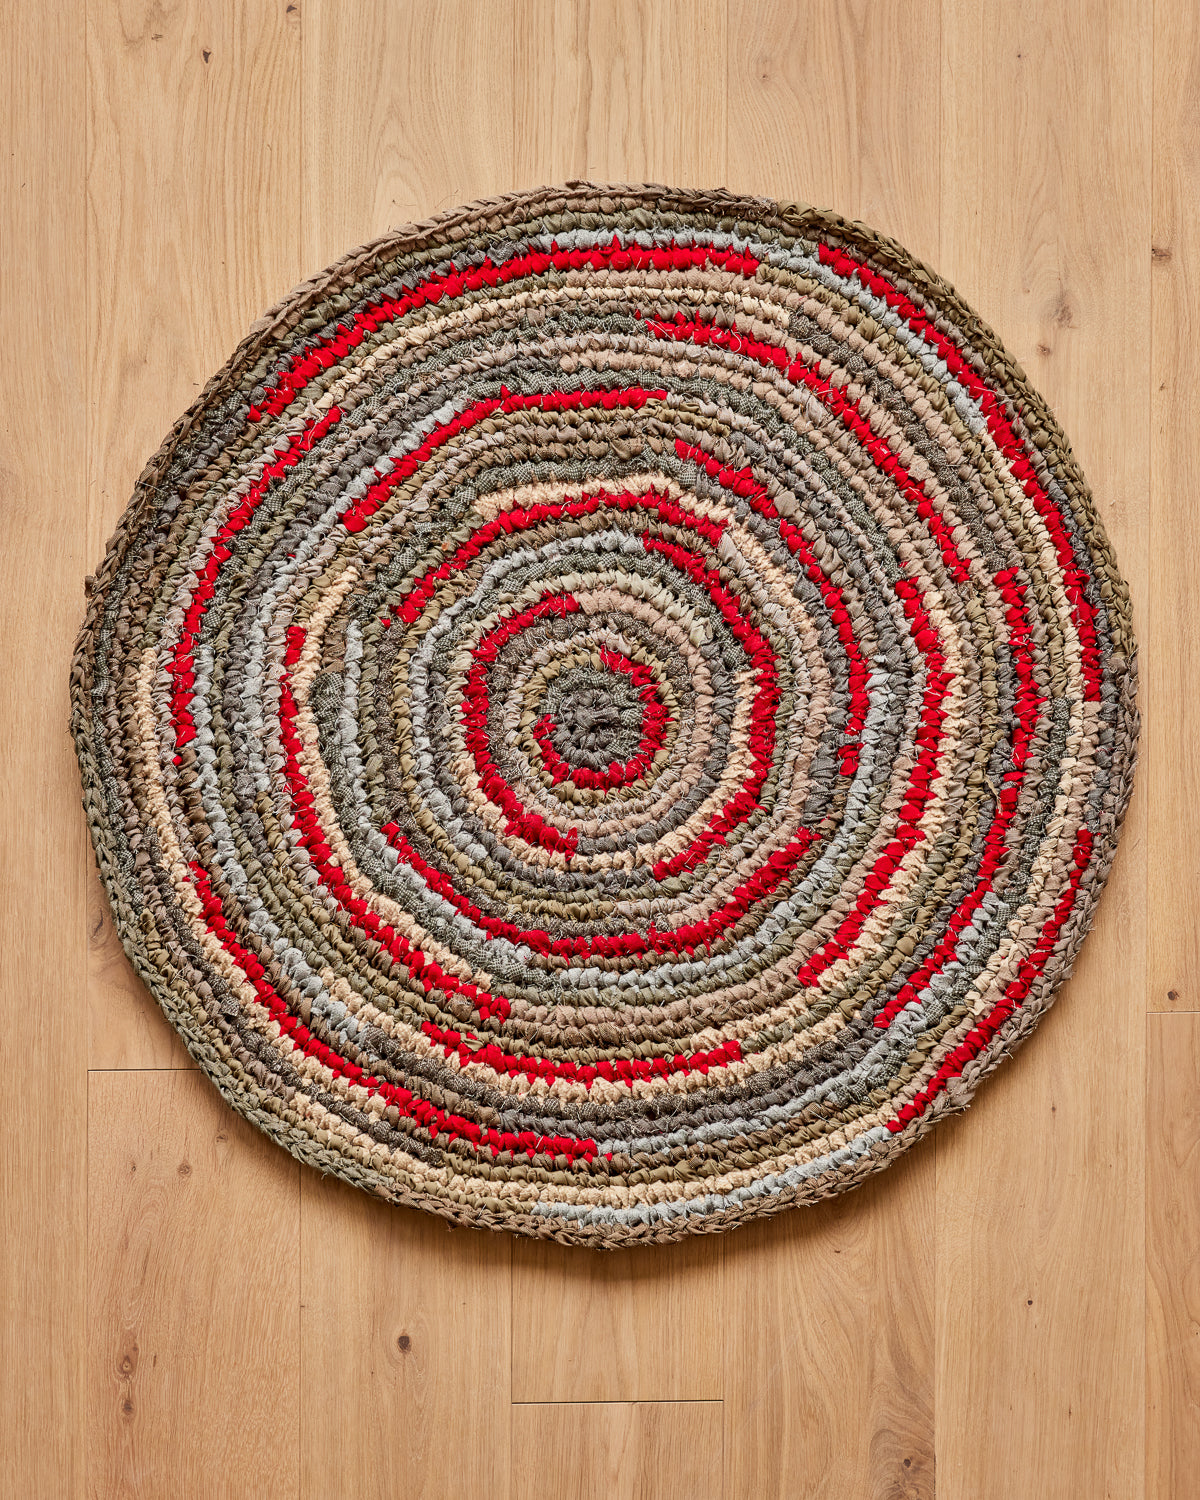 Olly's Circular Rug - Red with Gray